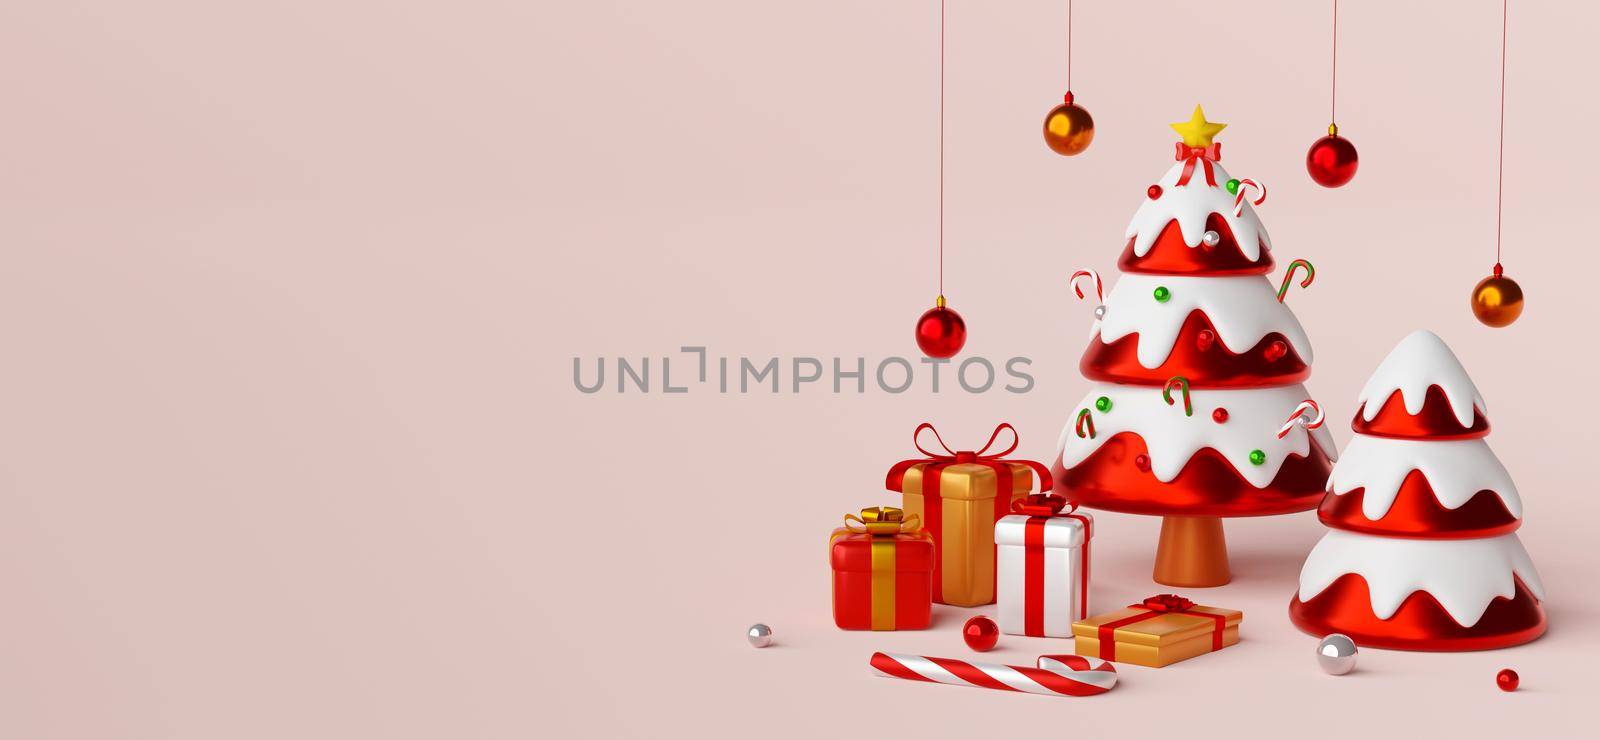 Christmas banner postcard scene of Christmas tree with presents, 3d illustration by nutzchotwarut